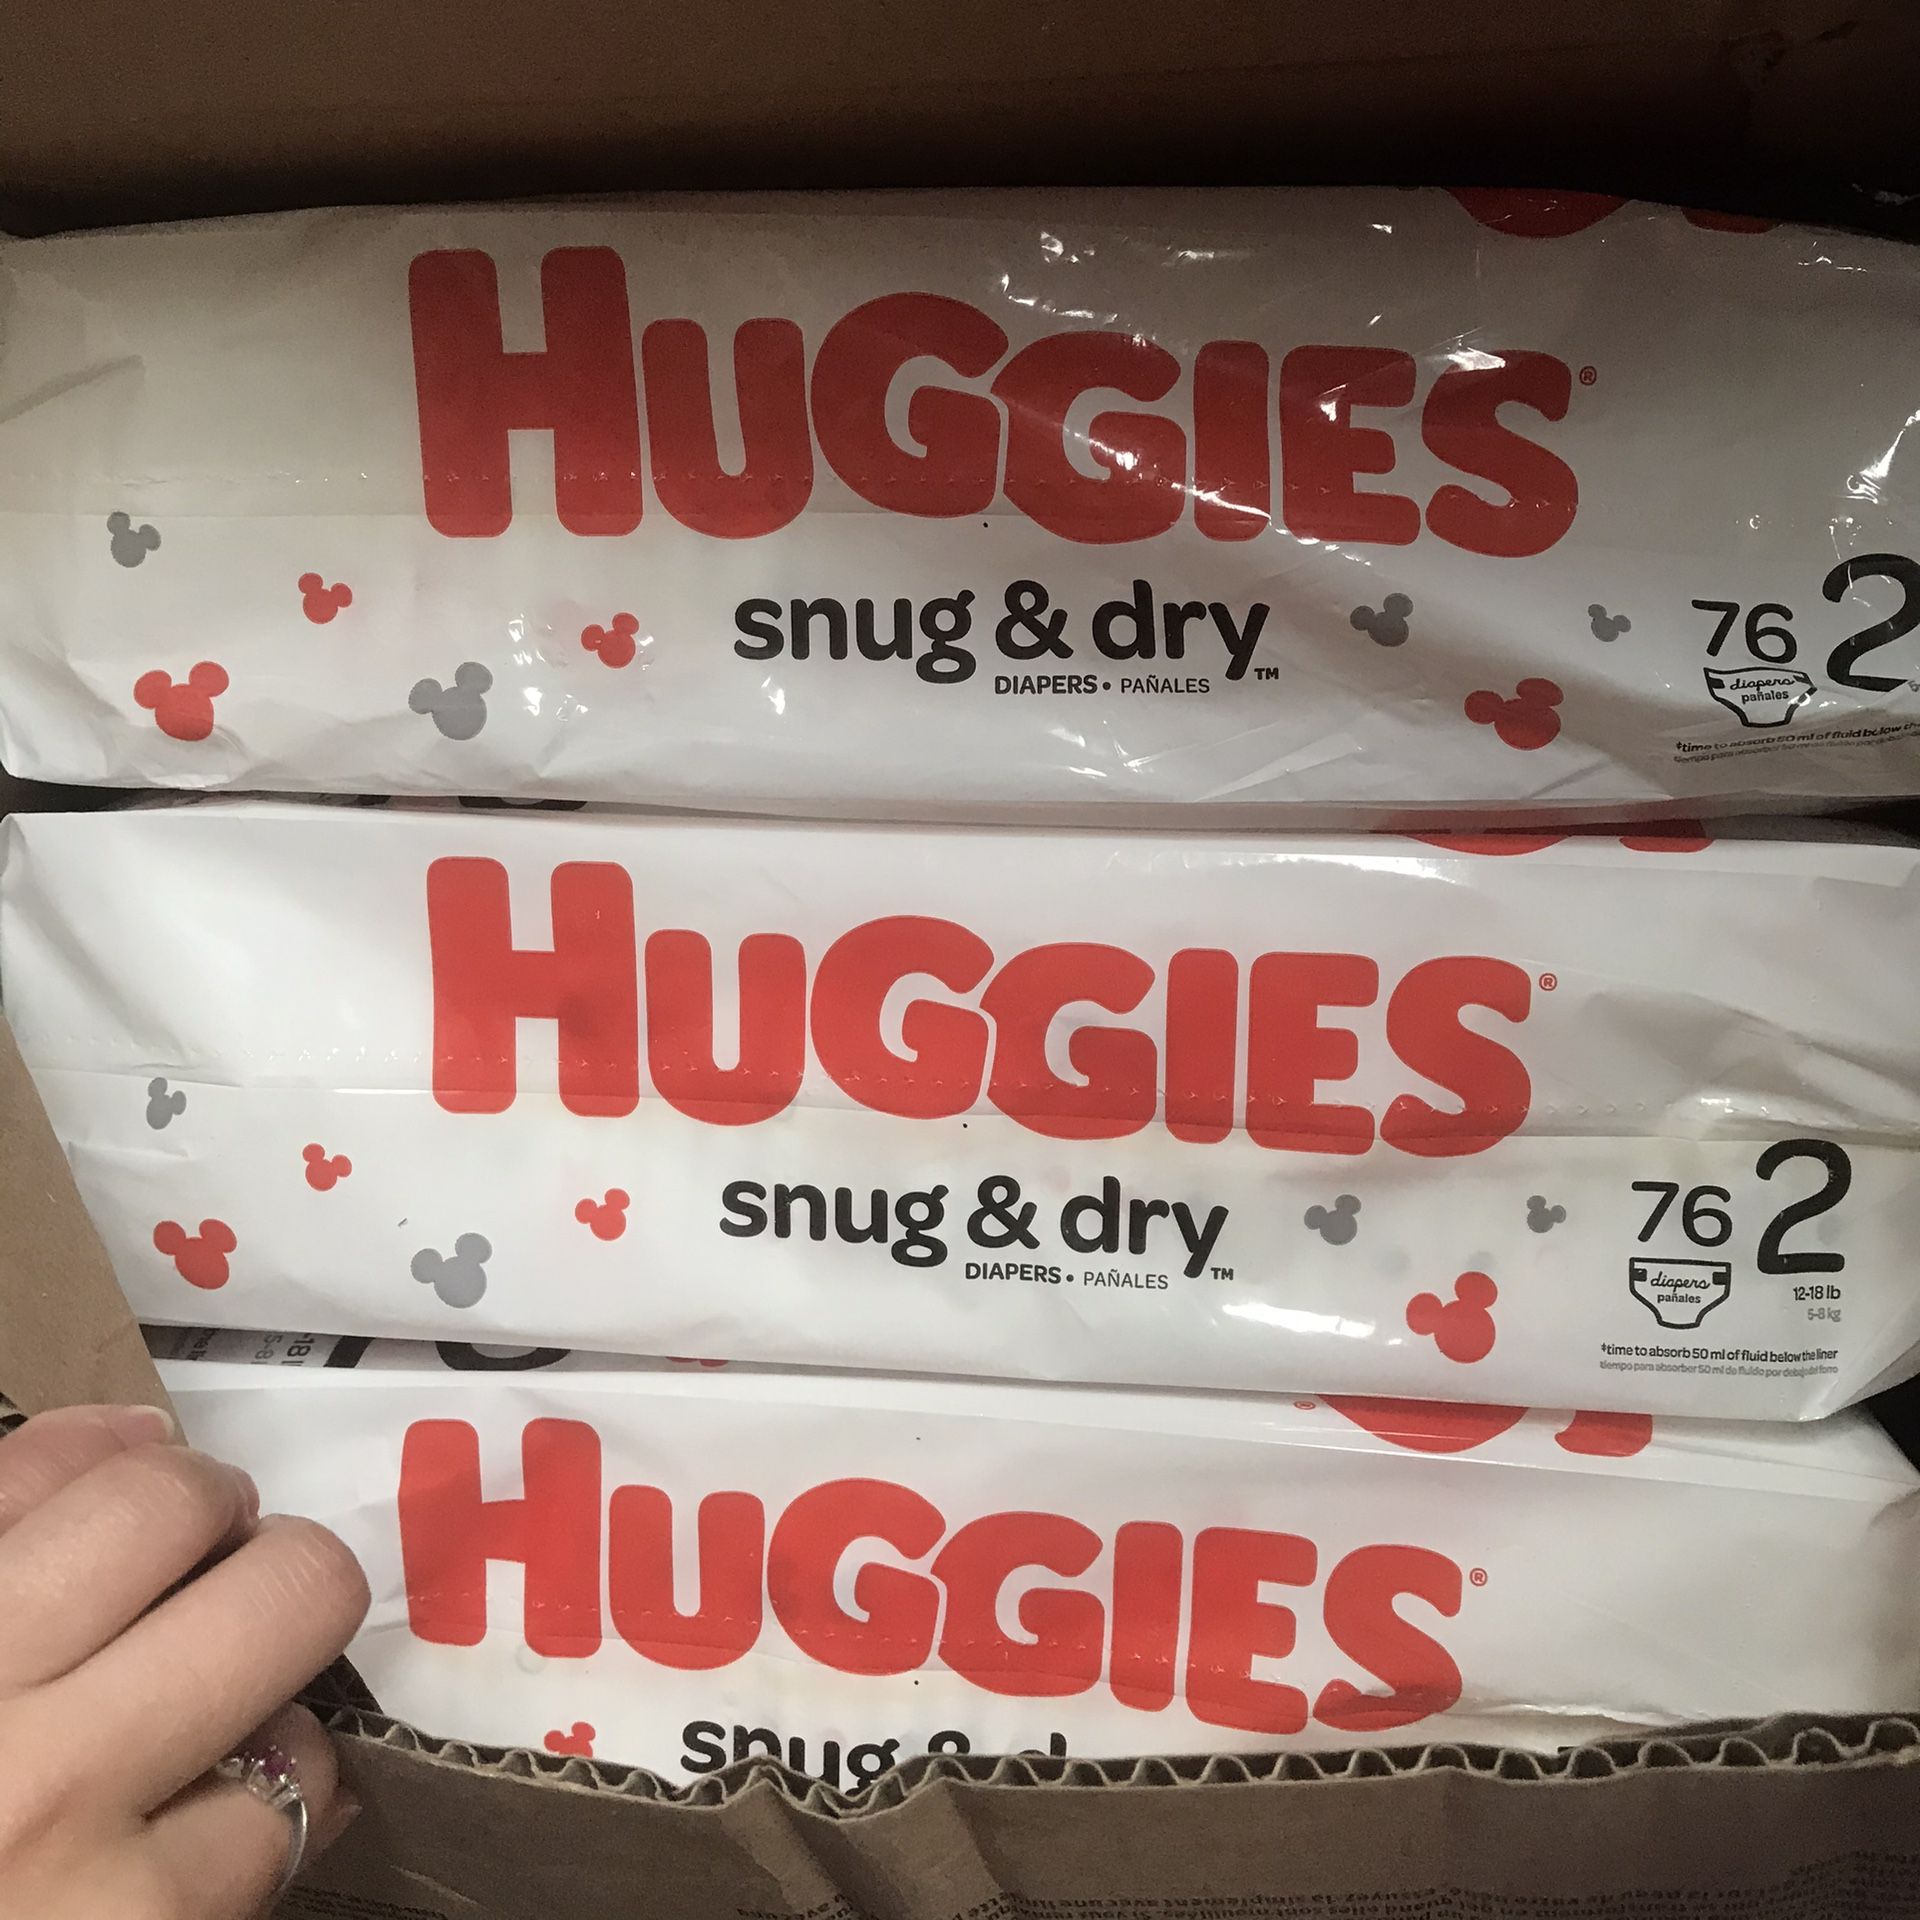 New Huggins snug & dry diapers size 2 - 228 count